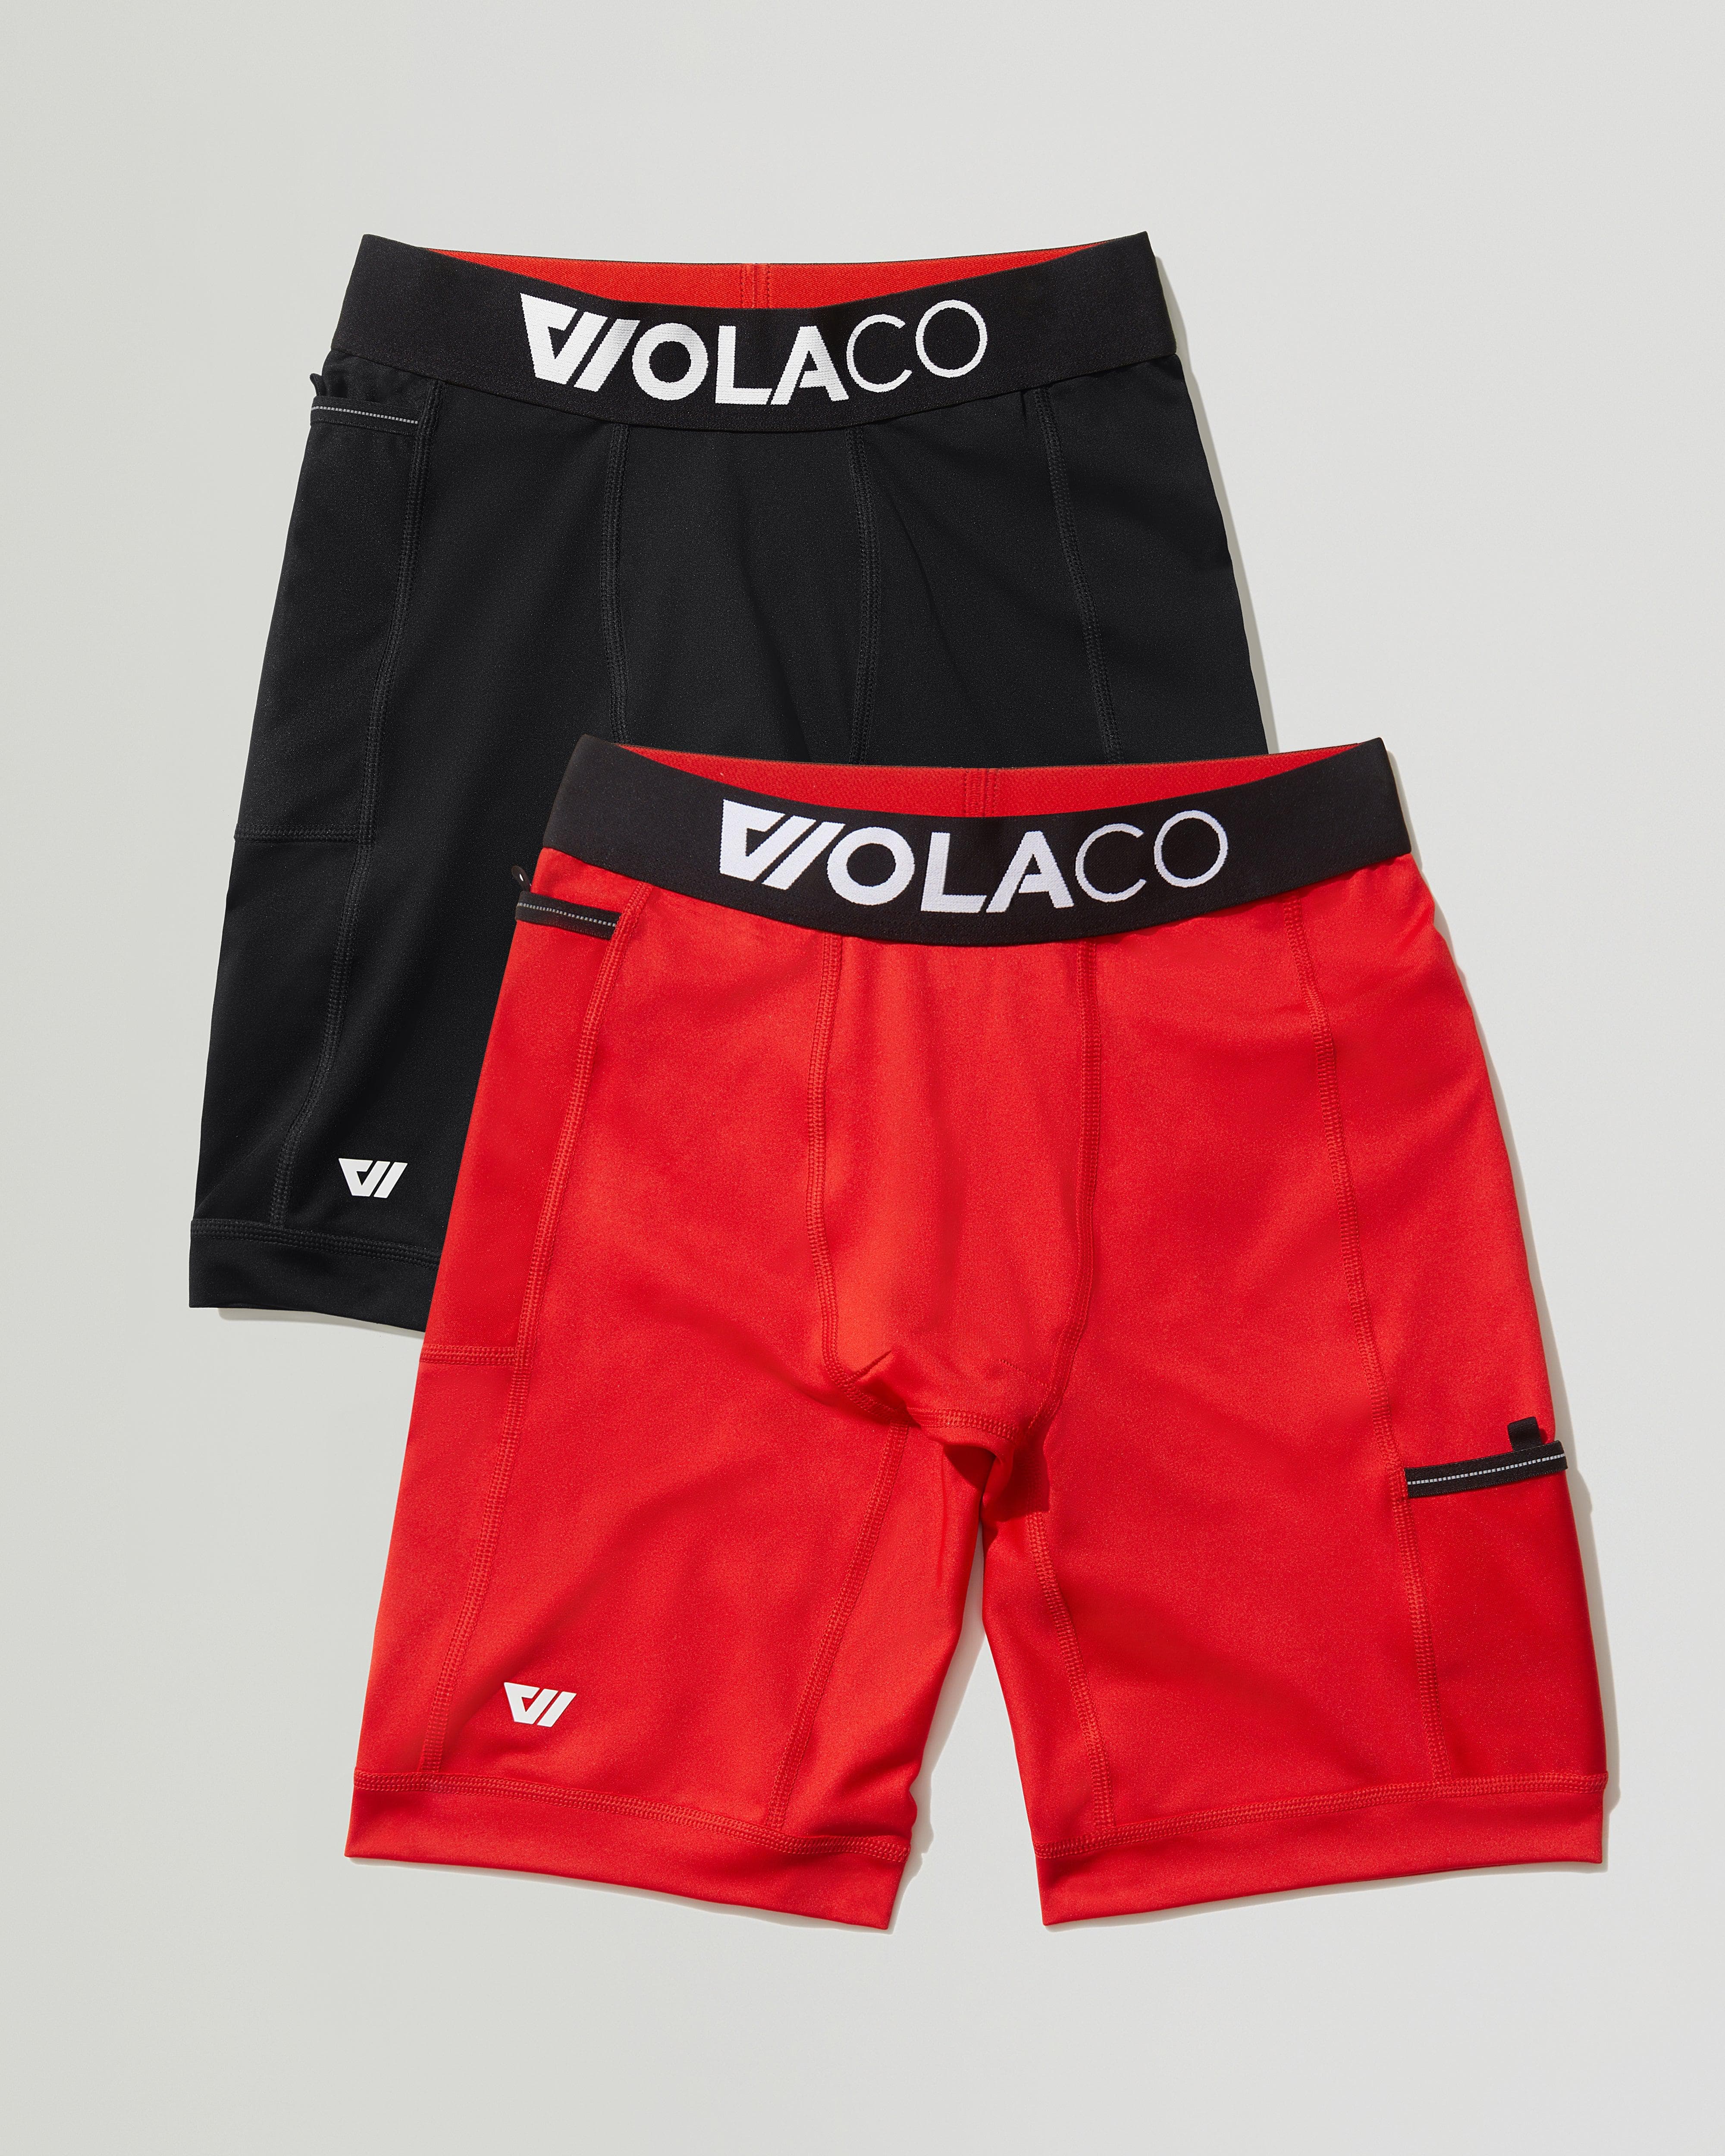 North Moore Short in Black  Compression shorts, Moisture wicking fabric, Sweat  proof